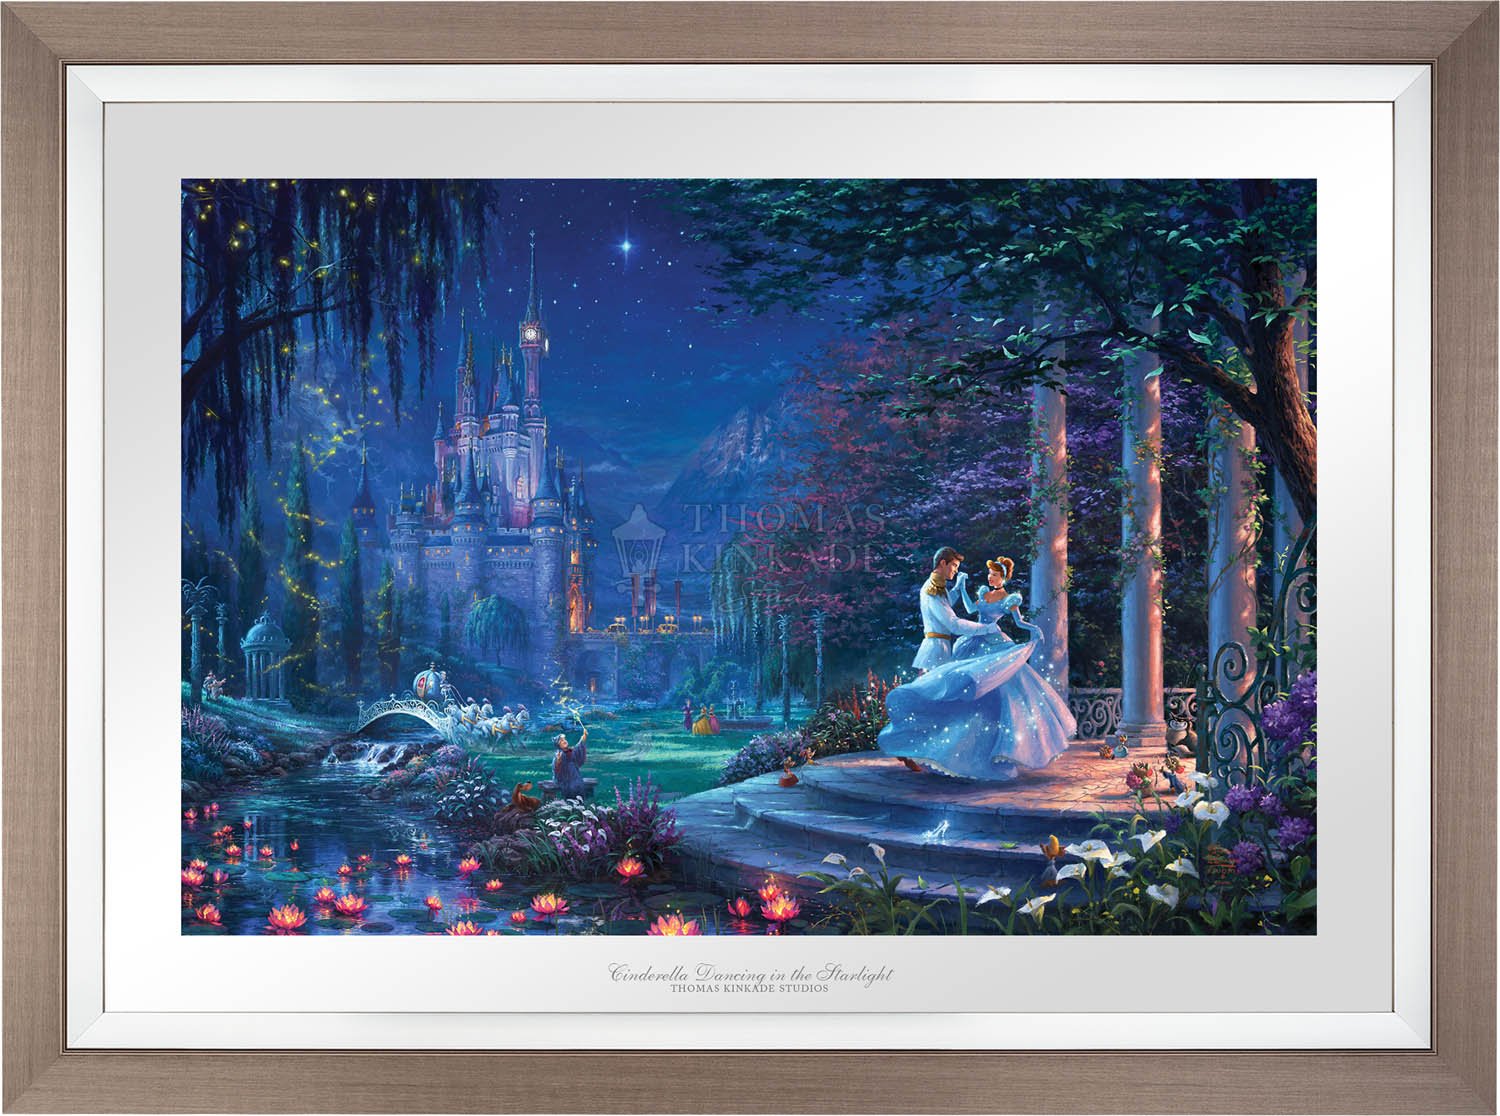 Cinderella's dreams have come true under the starlight Cinderella is in the arms of her prince - Space Gray Frame